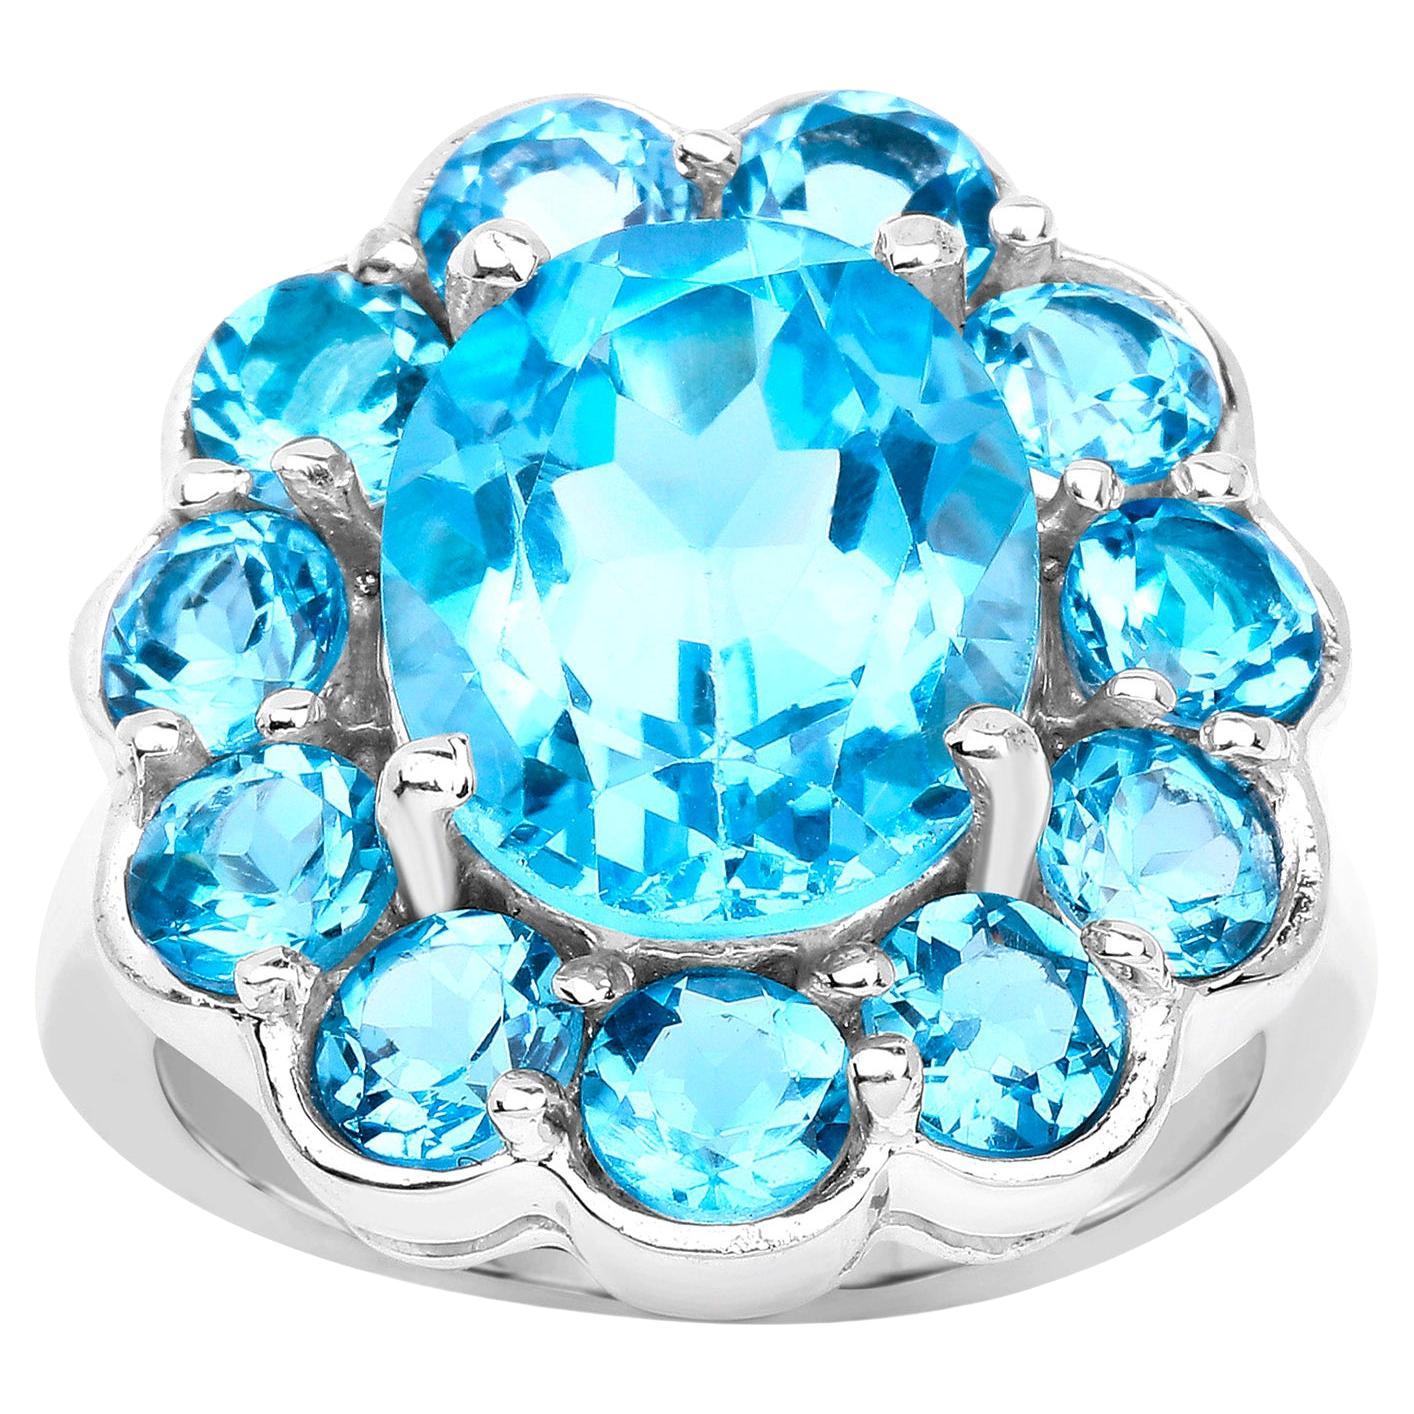 Swiss Blue Topaz Flower Cocktail Ring 8.8 Carats Sterling Silver For Sale